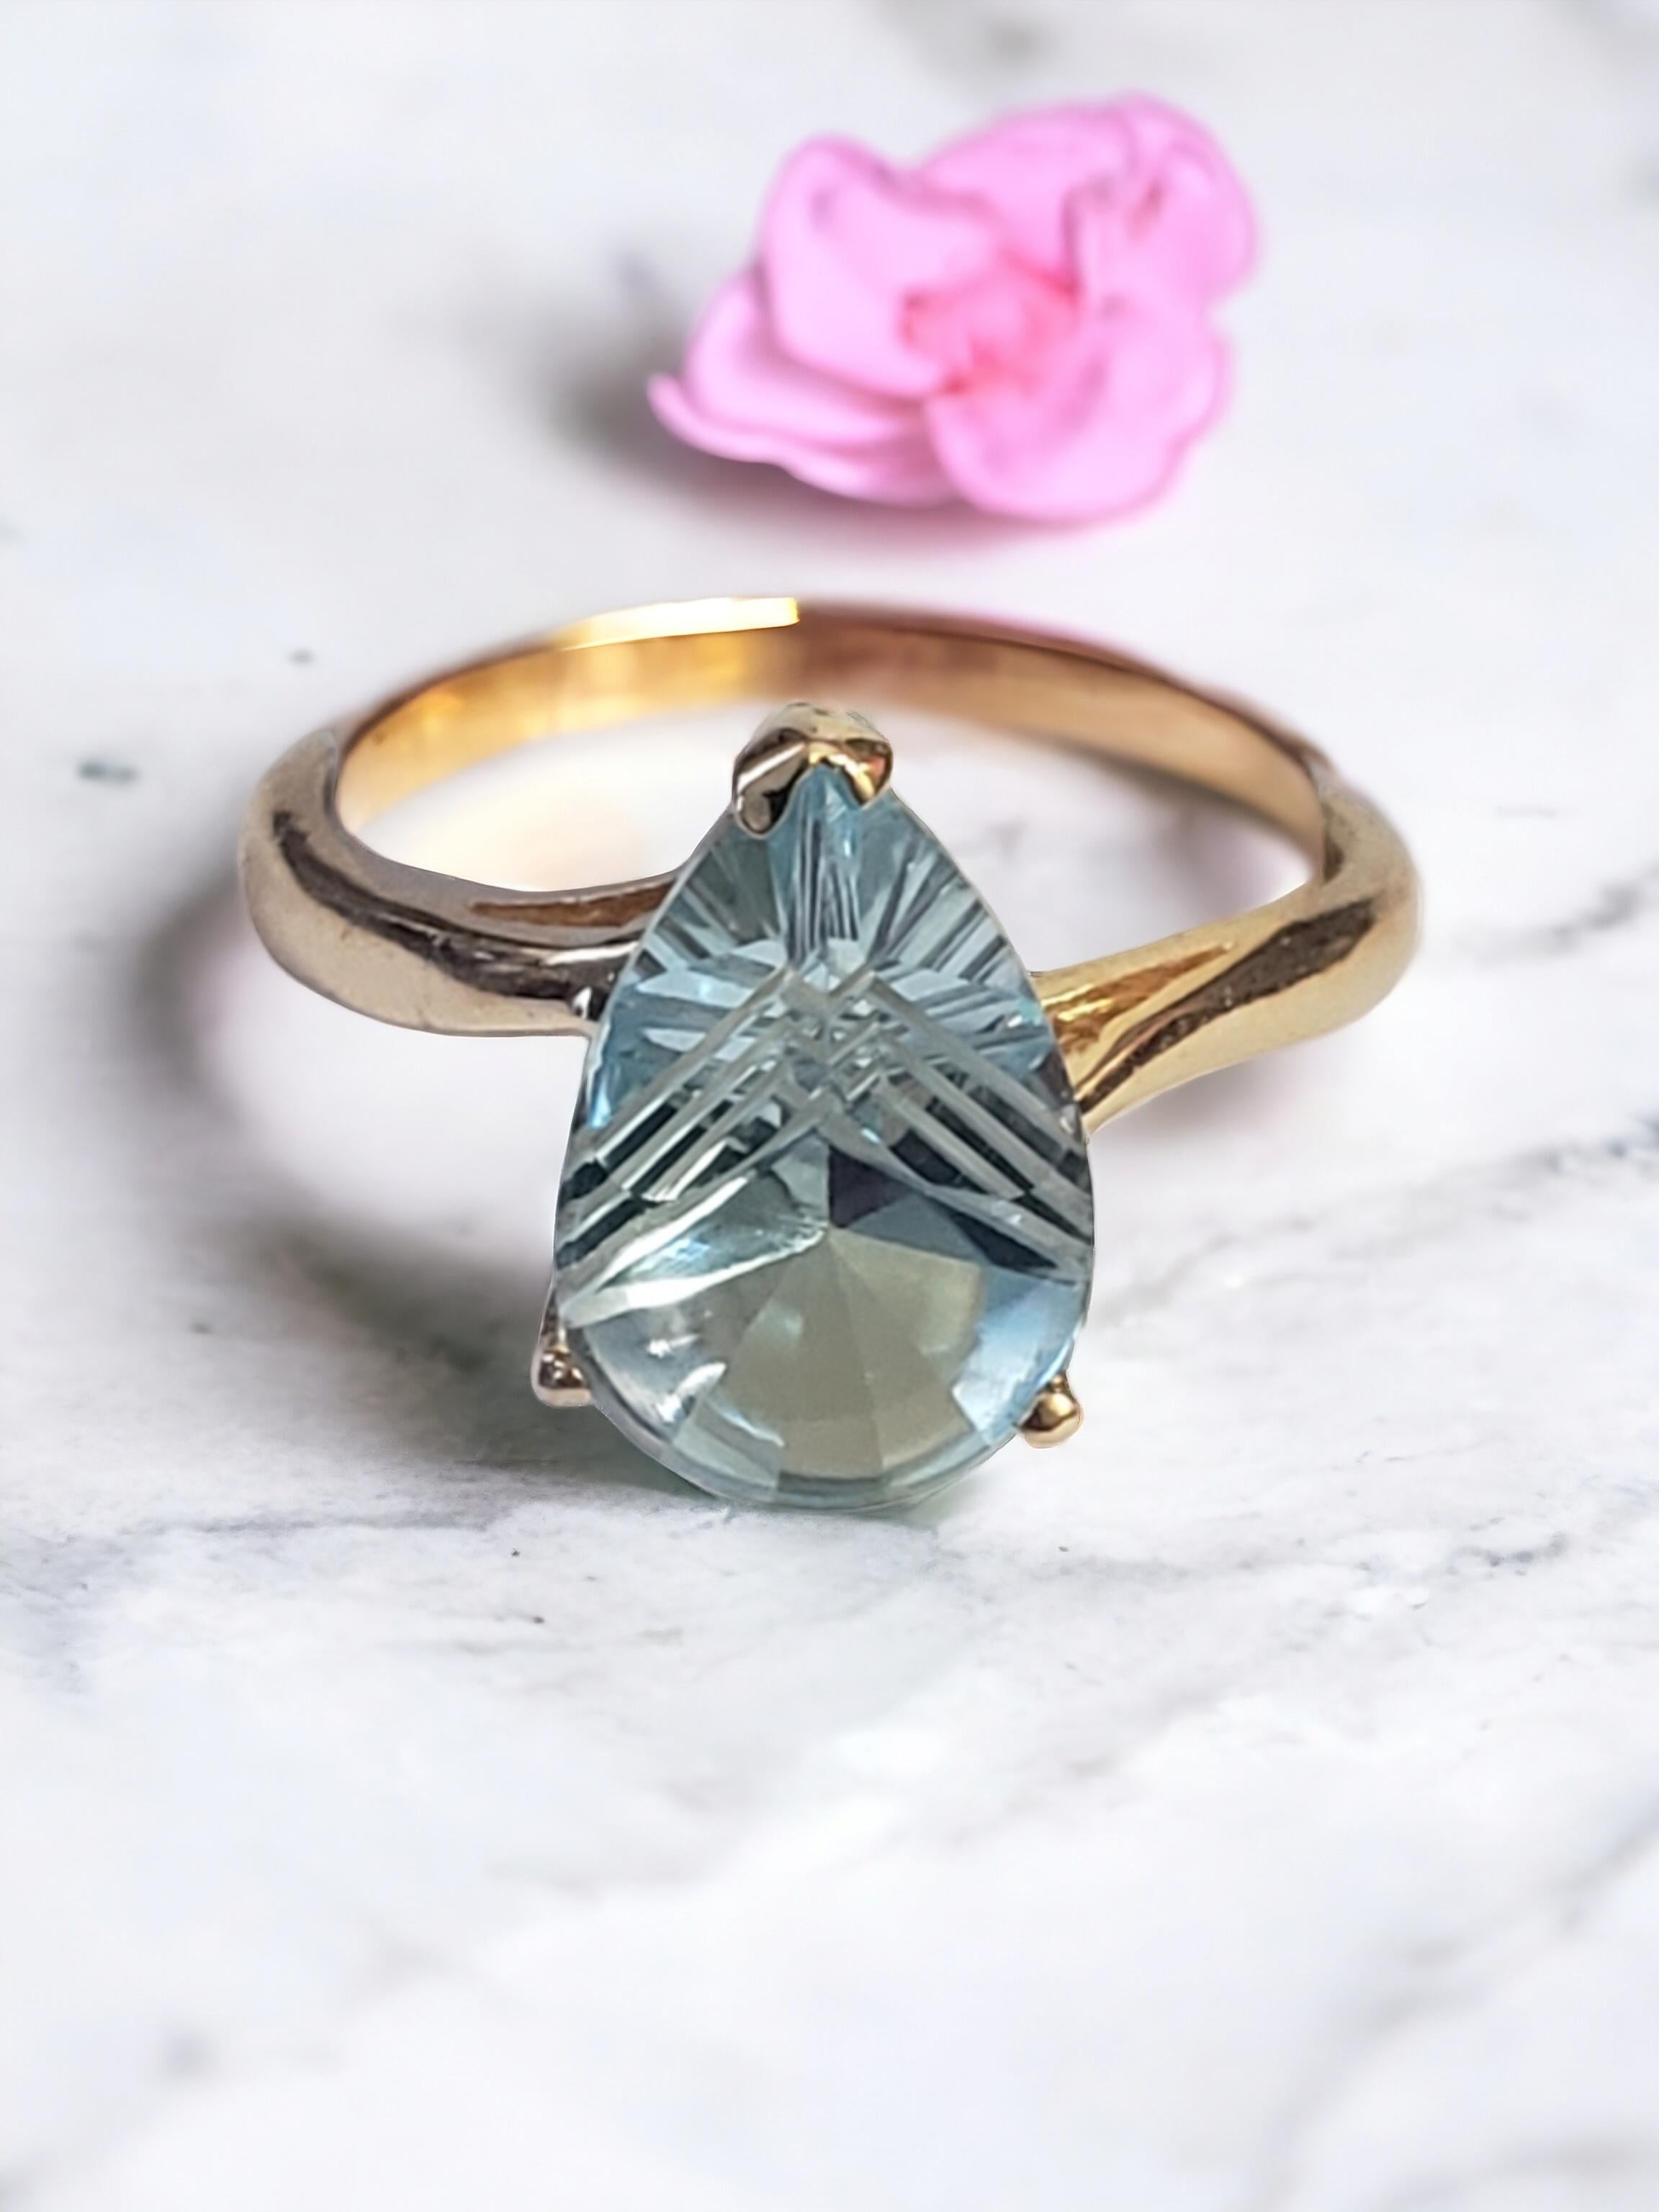 NEW Fantasy Special Cut 3 Ct. Natural Sky Blue Topaz Ring in 14k Yellow Gold For Sale 9